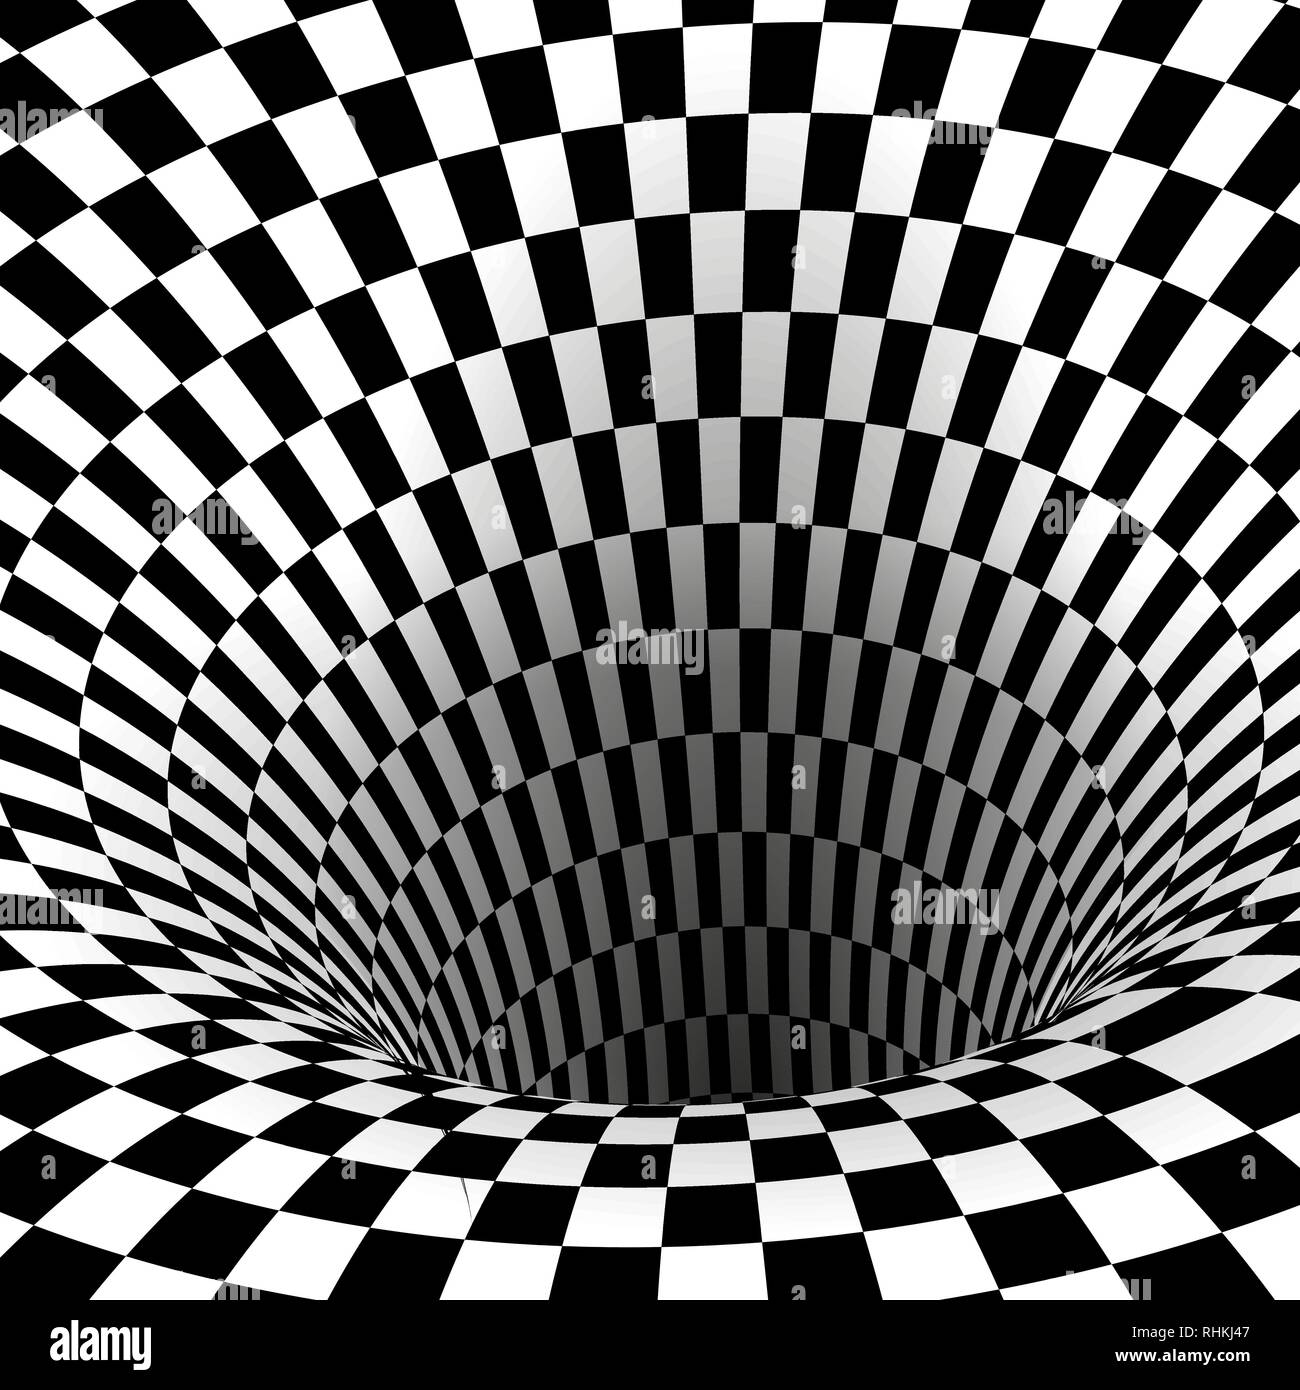 Abstract Wormhole Tunnel. Geometric Square Black and White Optical Illusion. Vector Illustration Stock Vector